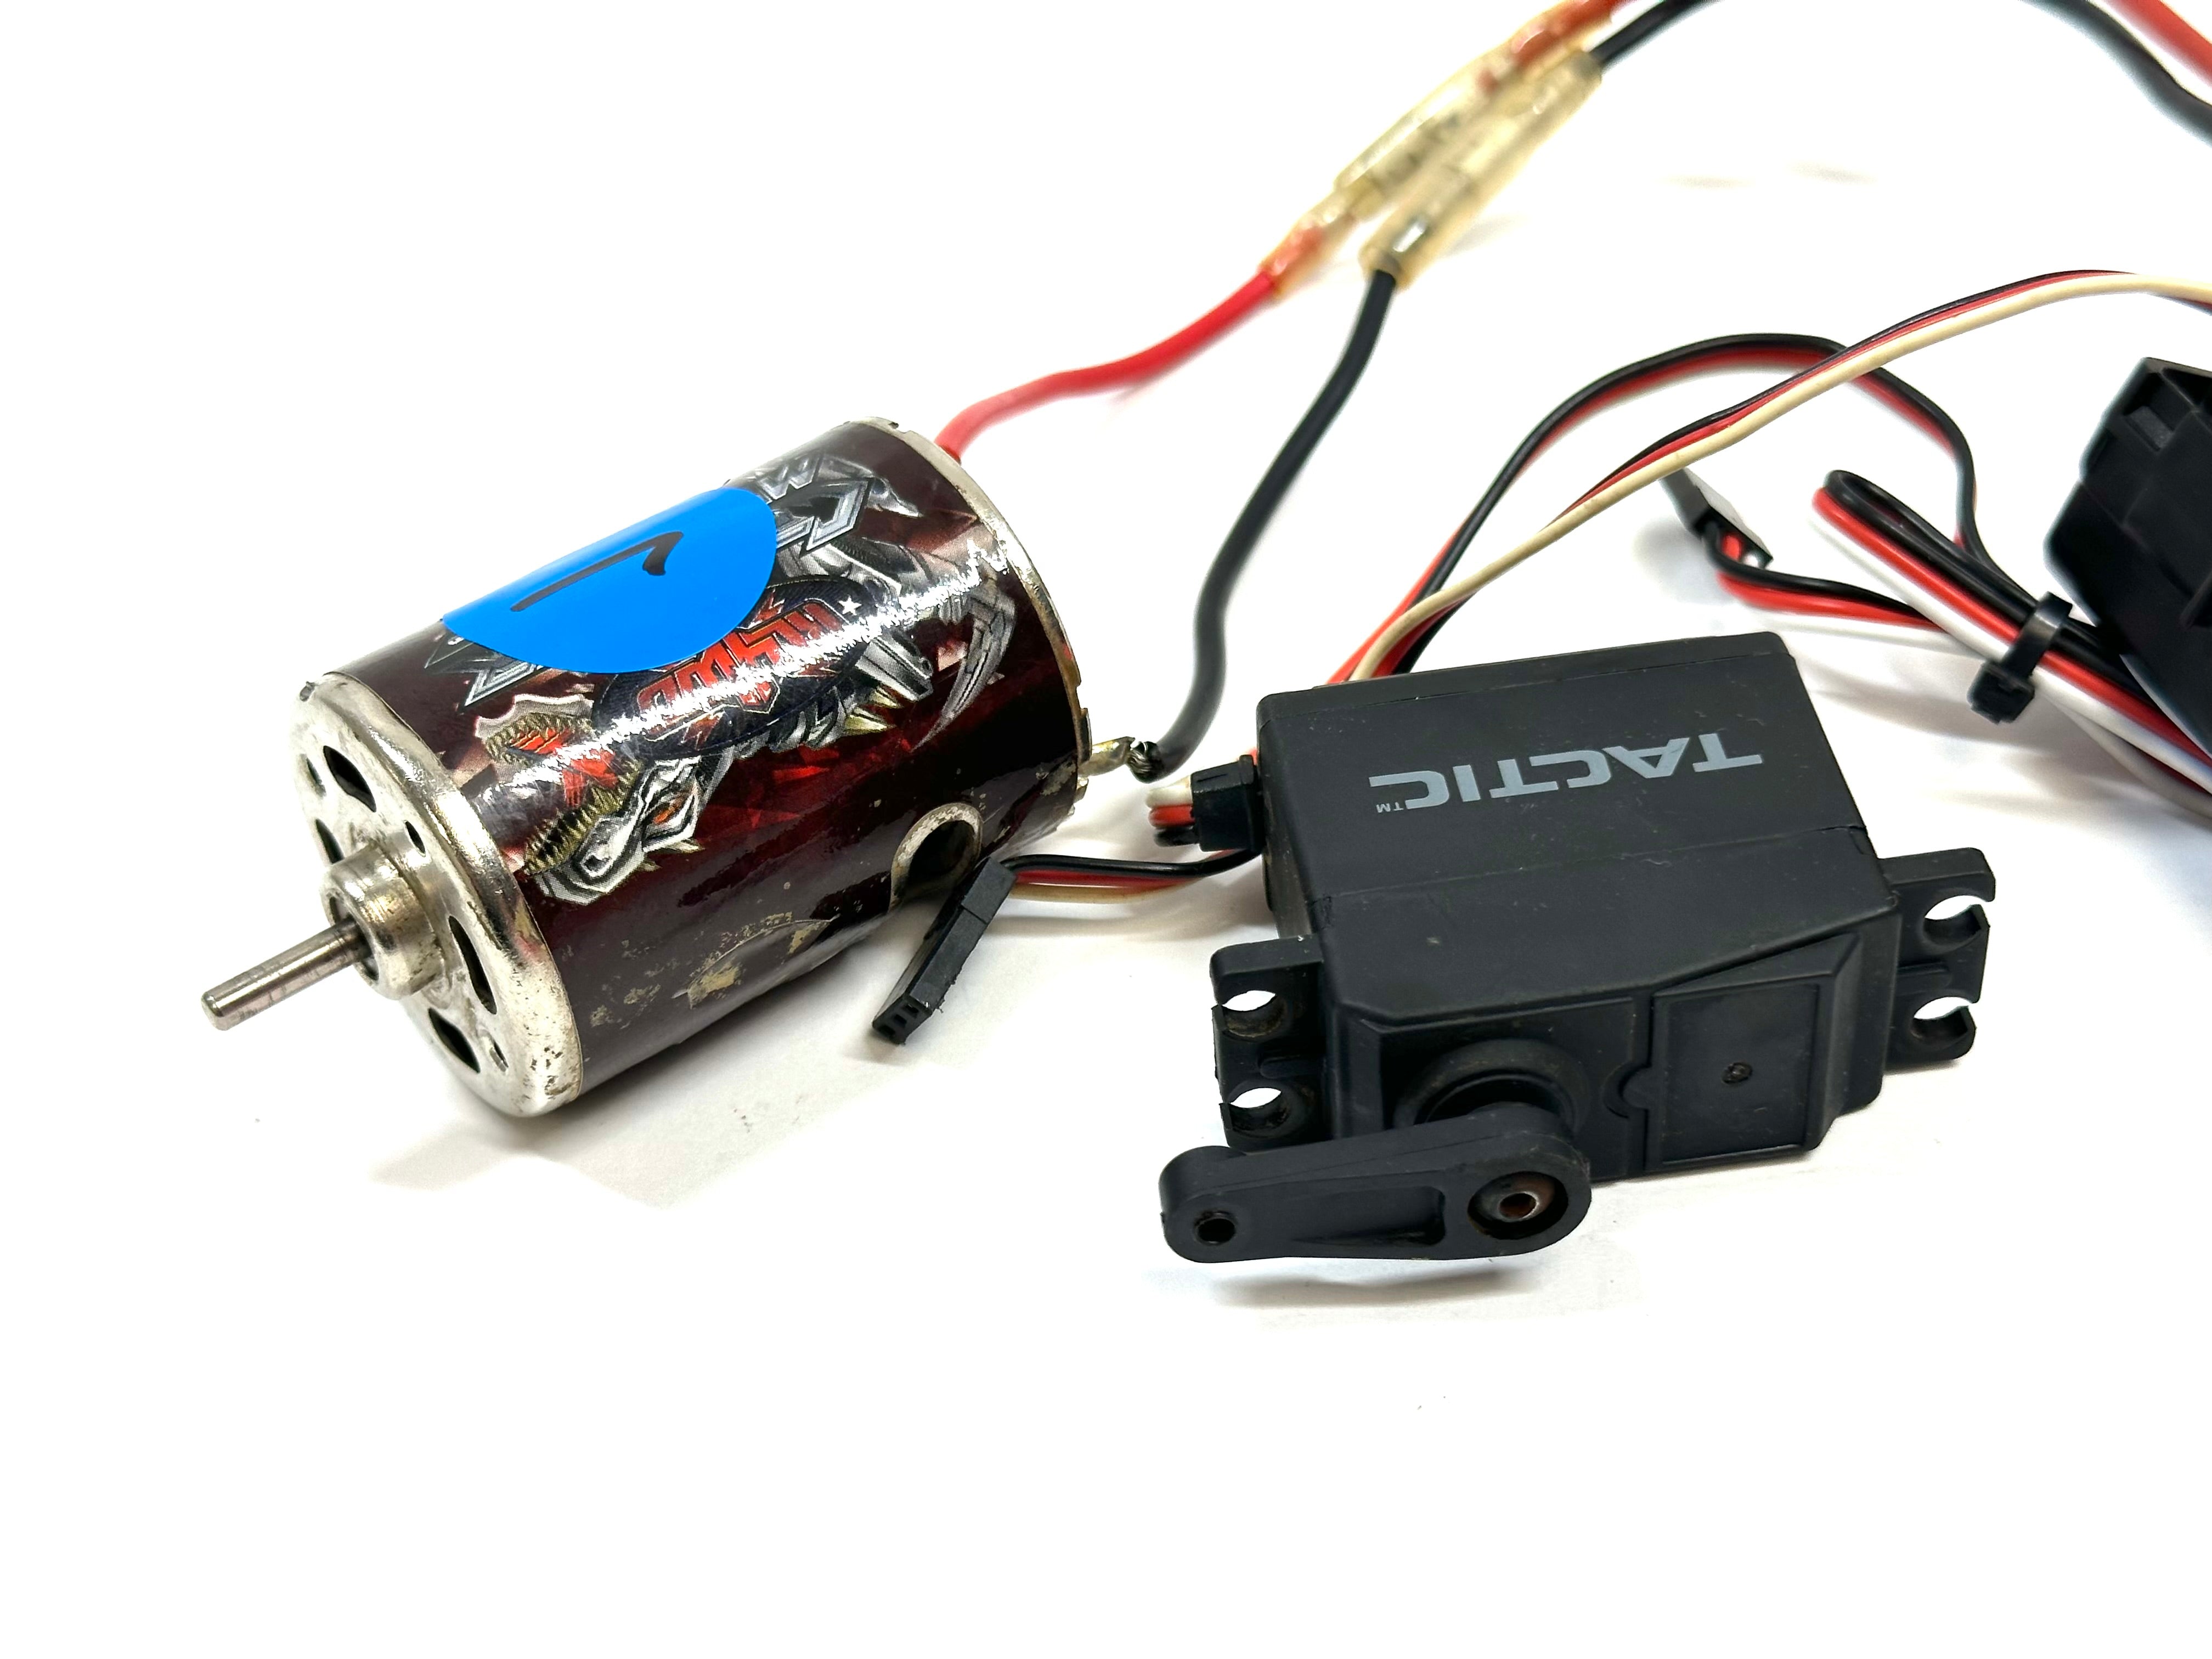 RC4WD 45T Brushed Motor, HexFly Brushed ESC, Tactic Steering Servo Lot